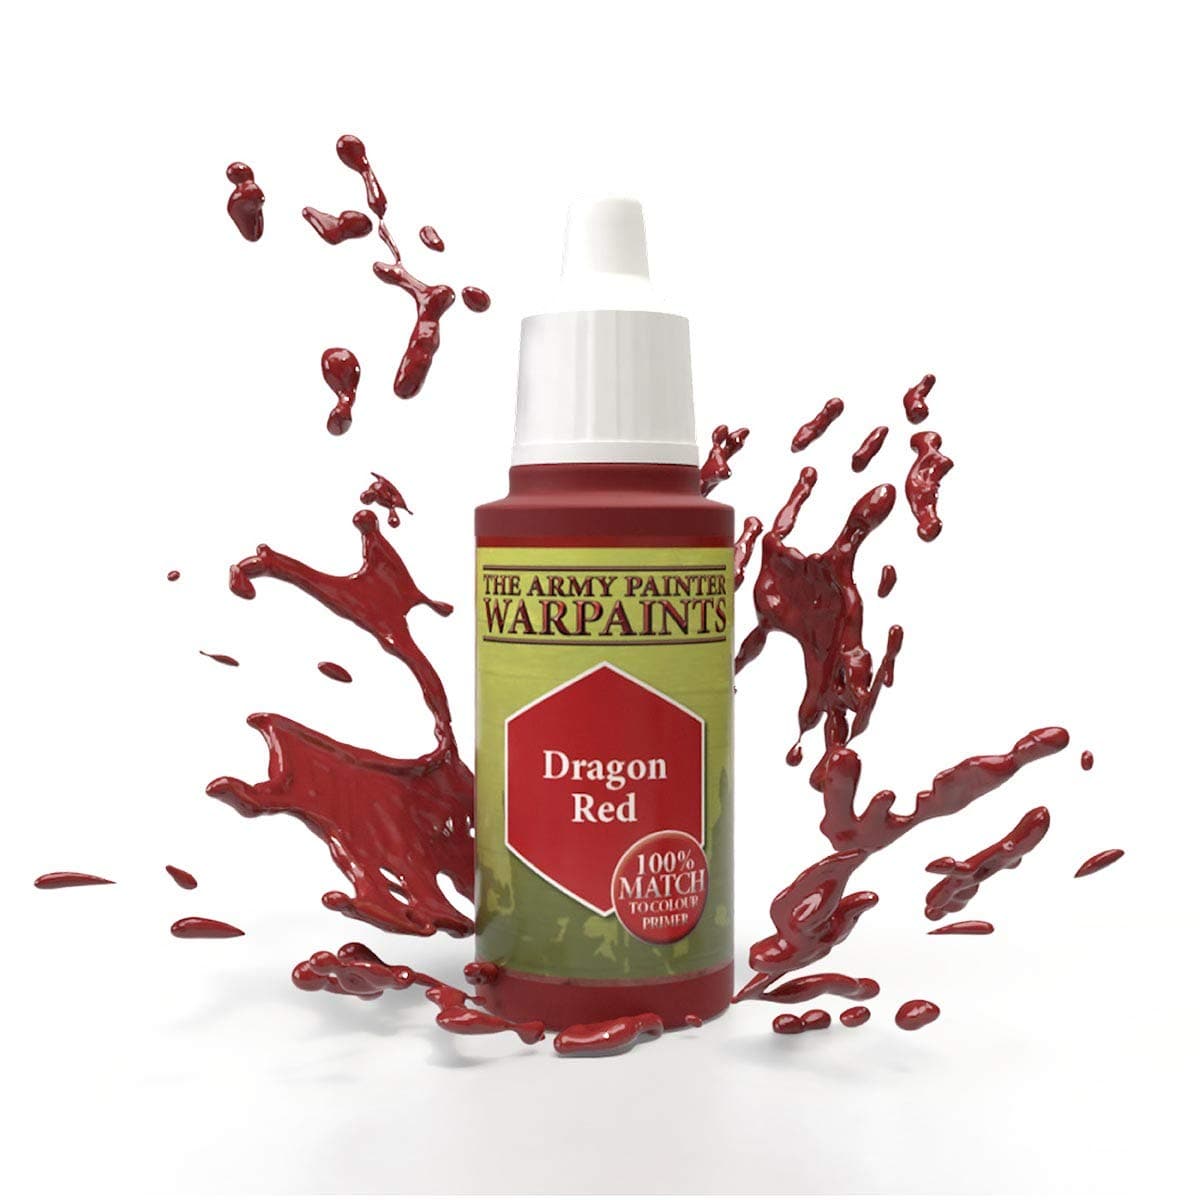 The Army Painter Accessories The Army Painter Warpaints: Dragon Red 18ml